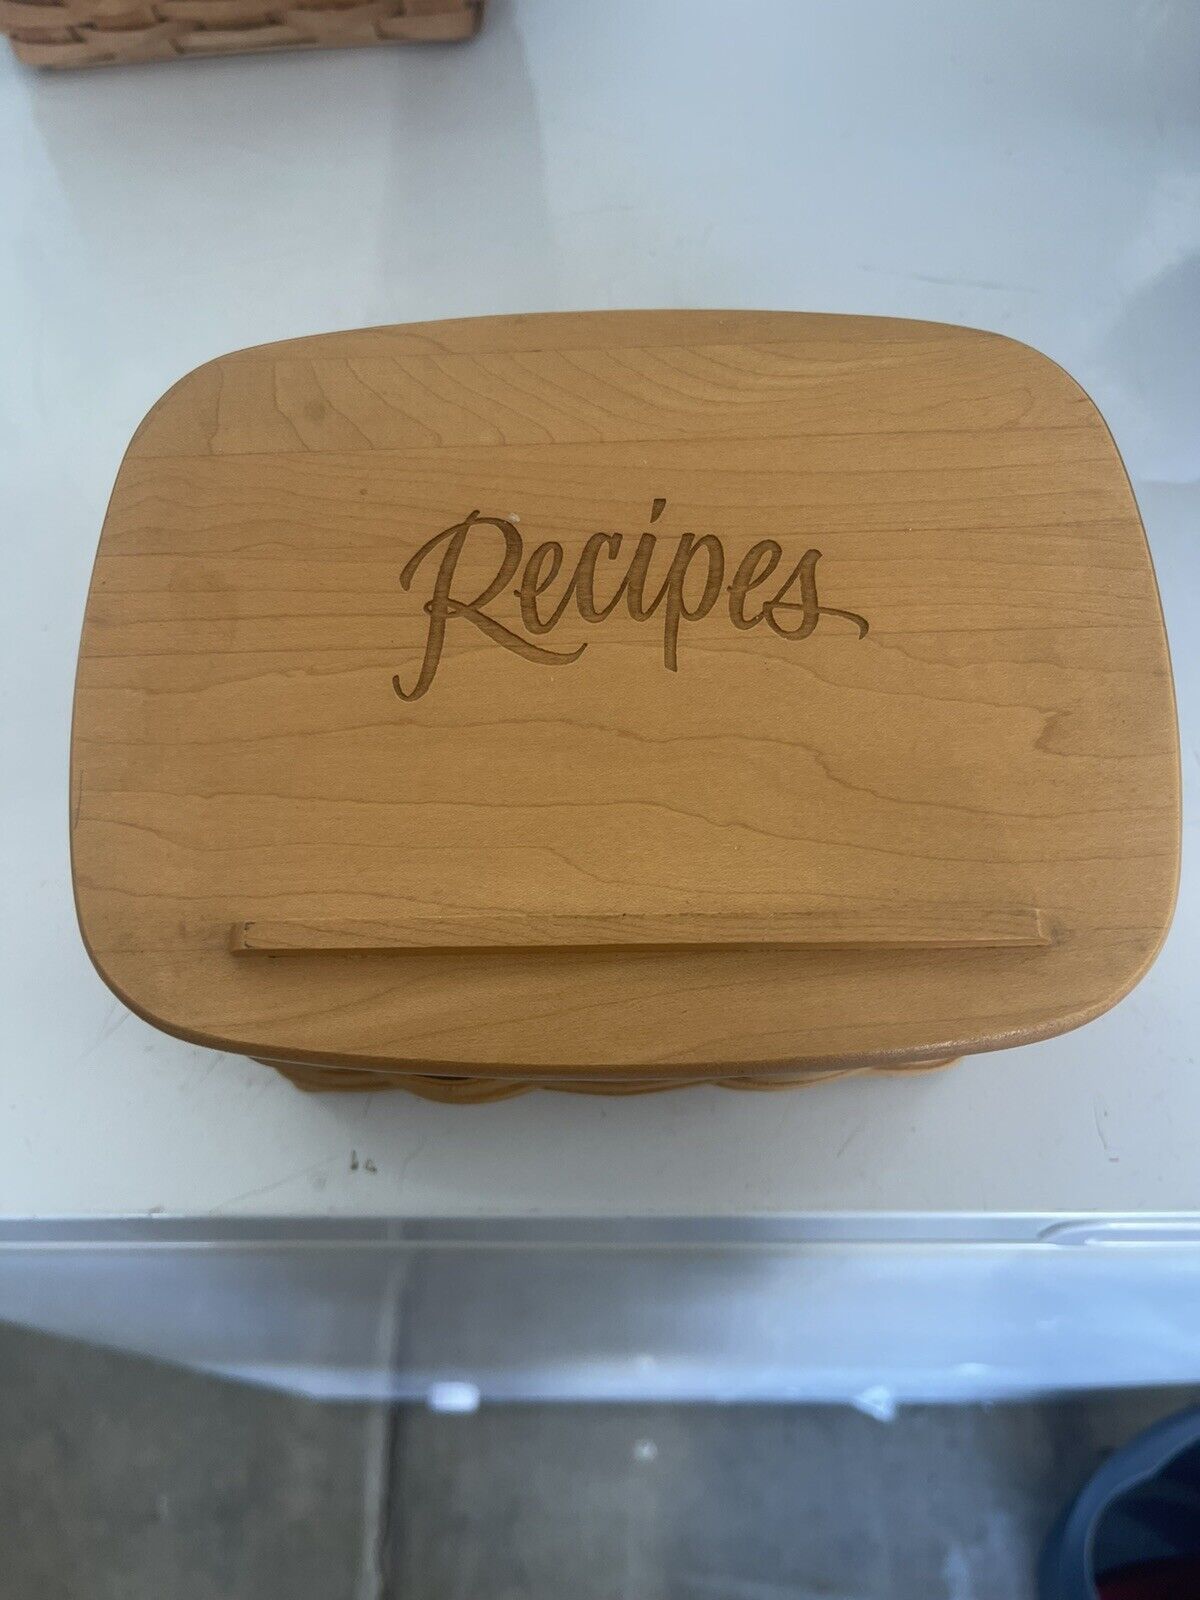 Longaberger Recipe Basket With Wooden Lid, 2002 And Plastic Insert